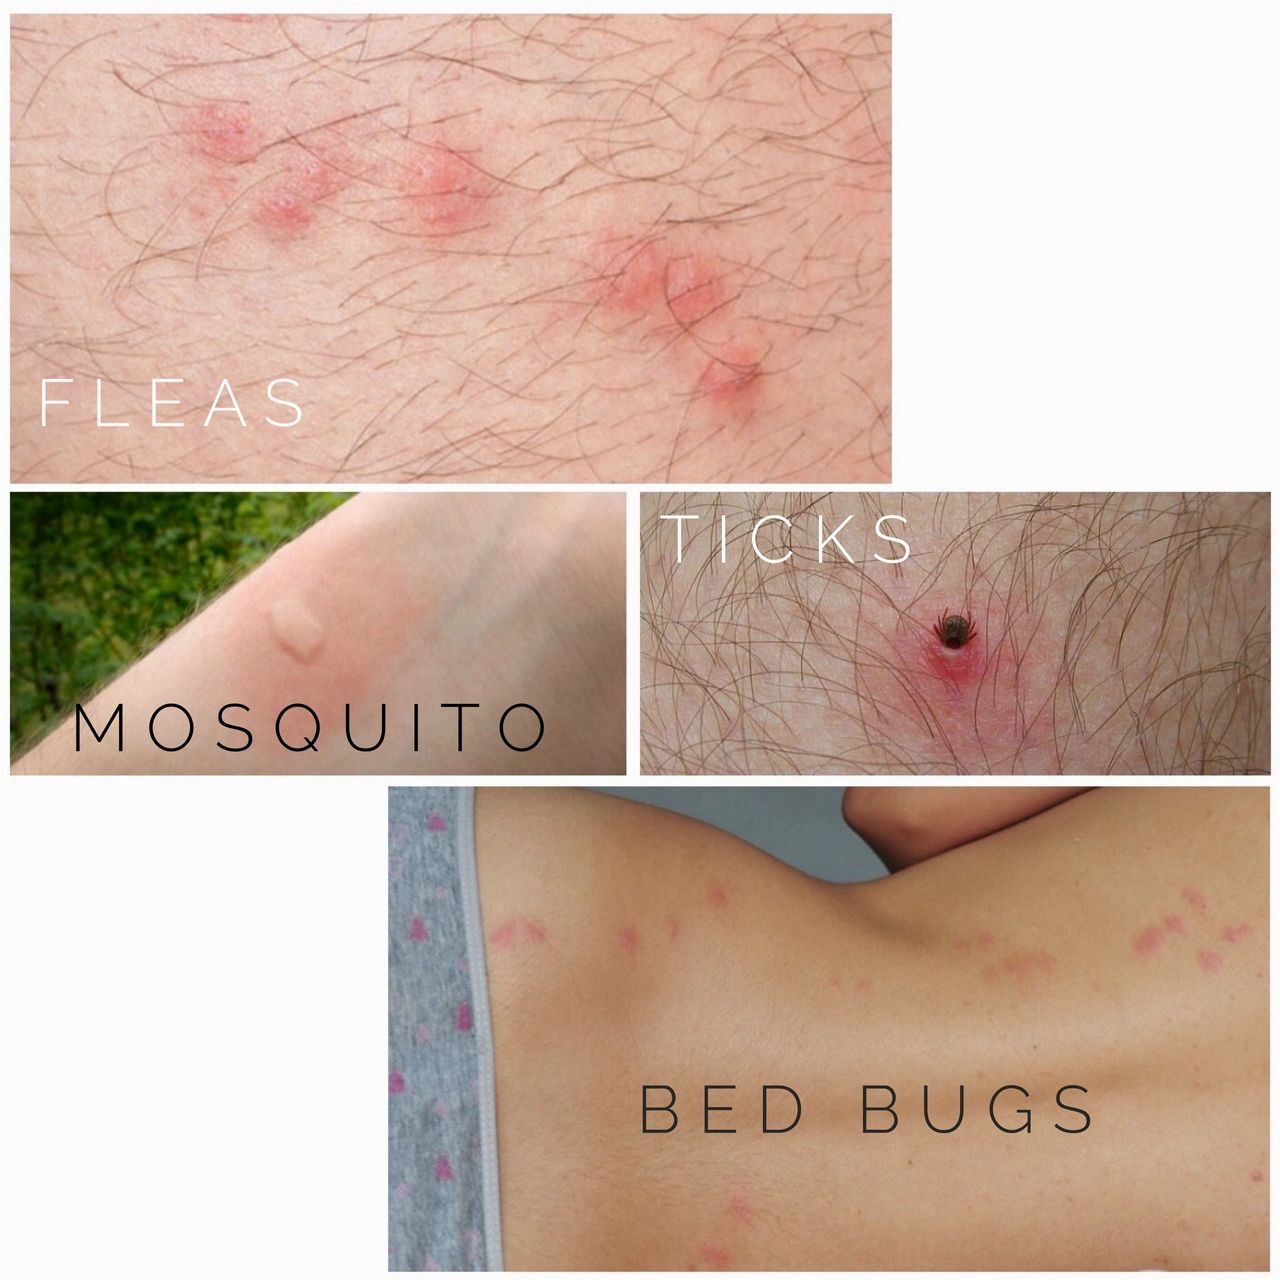 Flea, mosquito, tick and bed bug bites on humans. what bug is biting you.